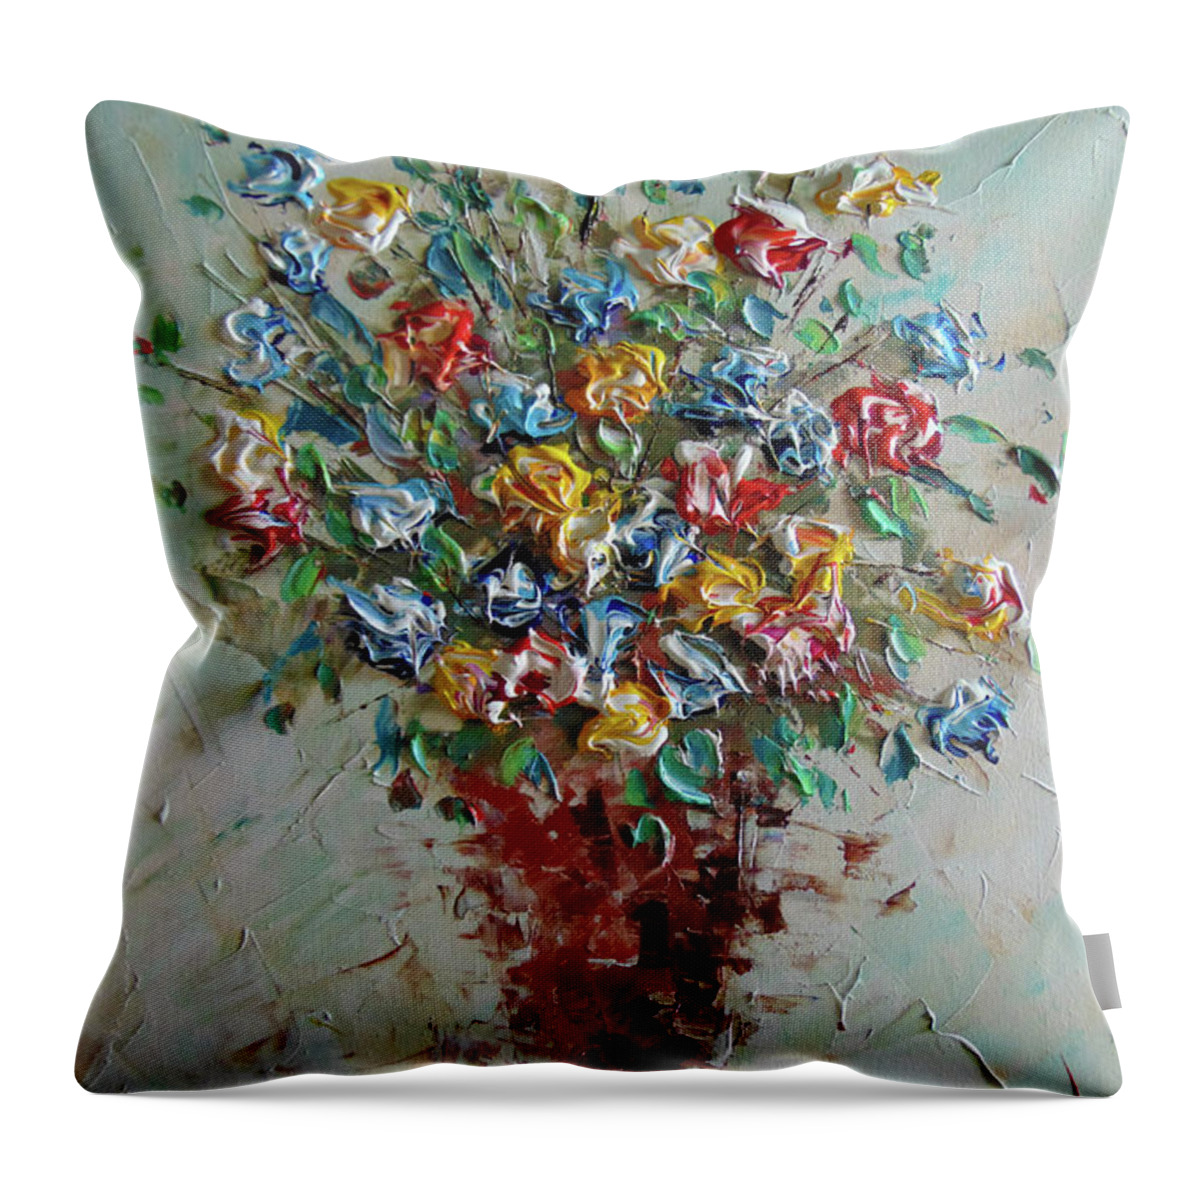 Frederic Payet Throw Pillow featuring the painting Carnations by Frederic Payet